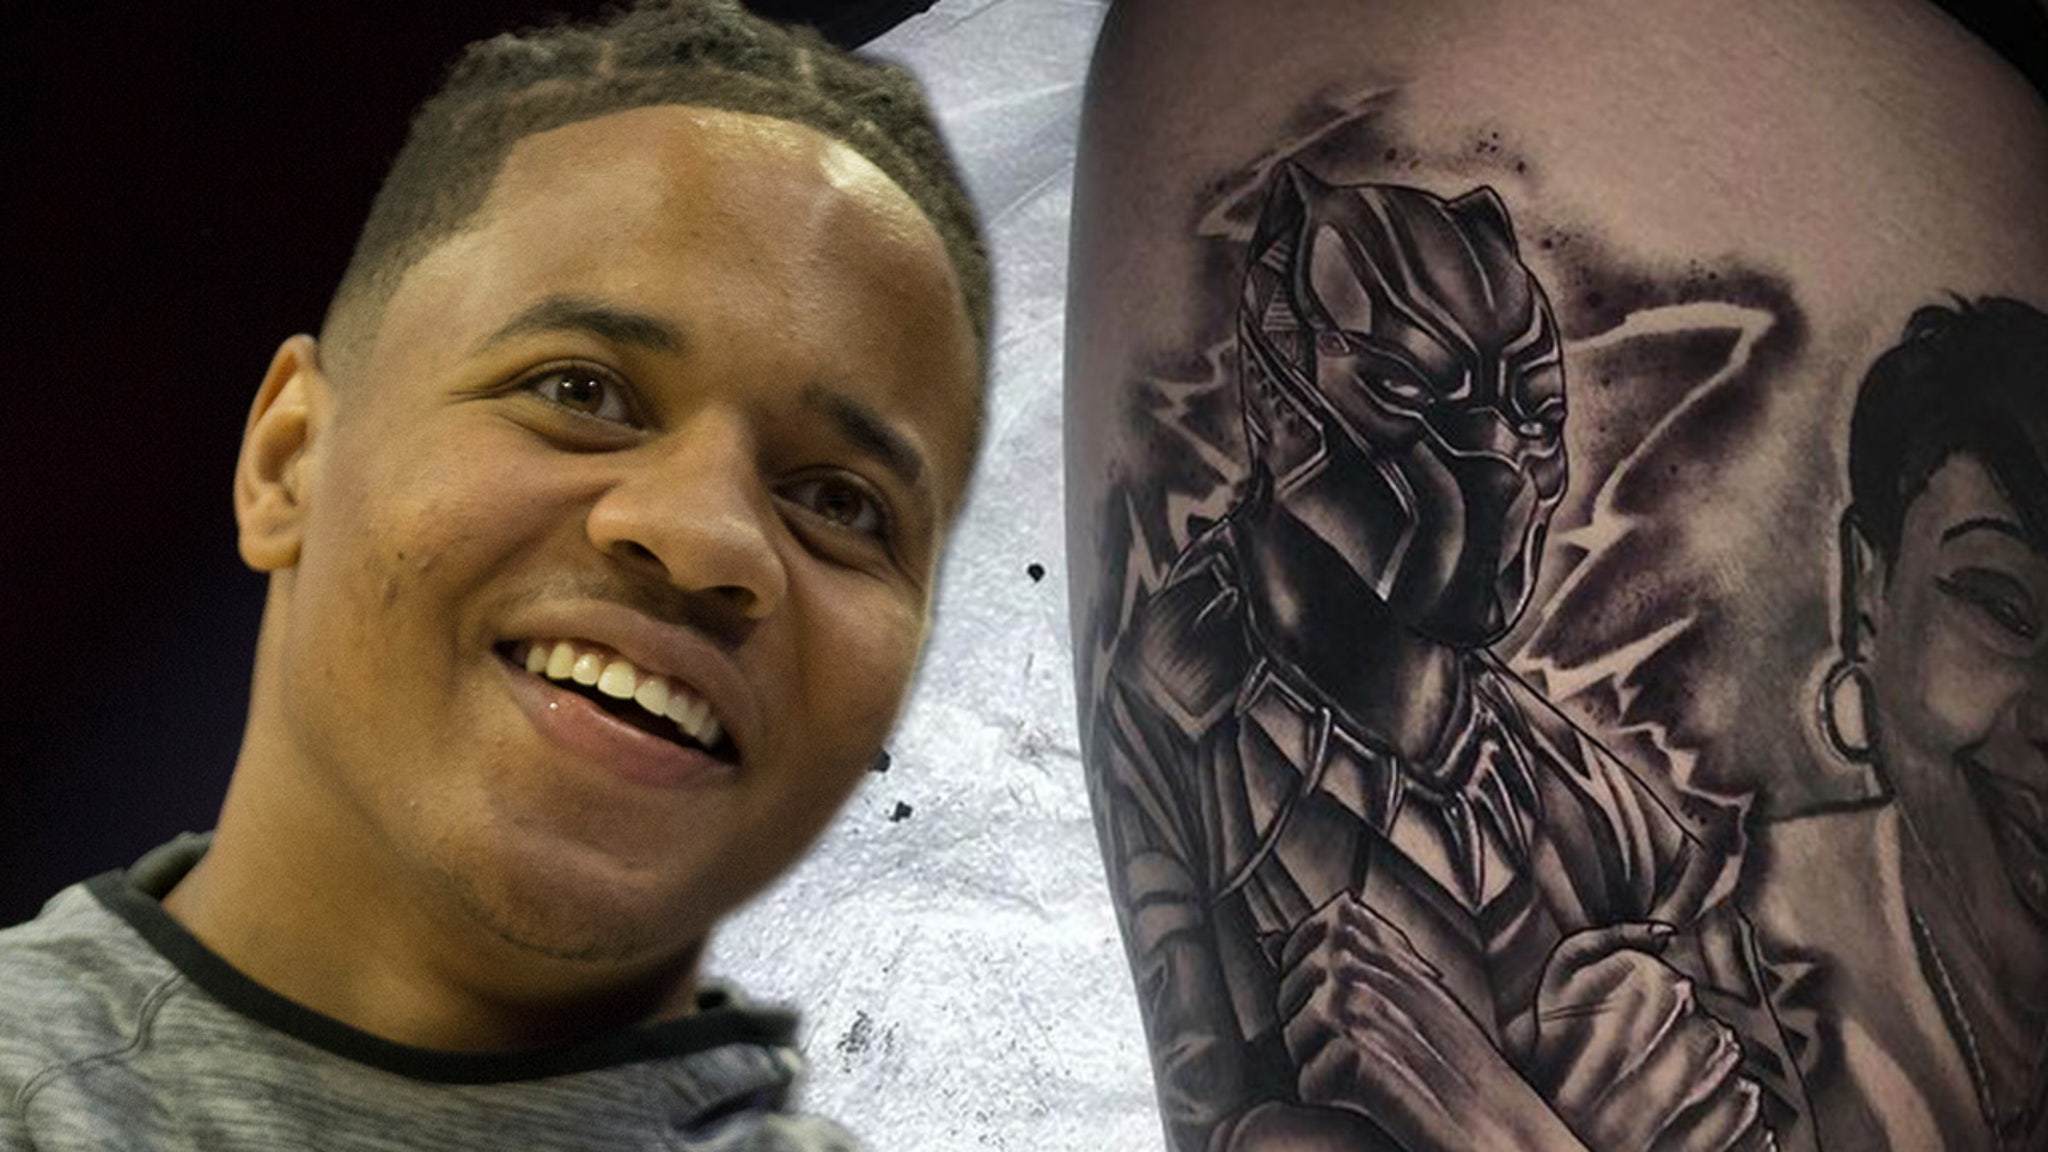 NBA's Markelle Fultz Gets Amazing Foot-Long 'Black Panther' Tattoo